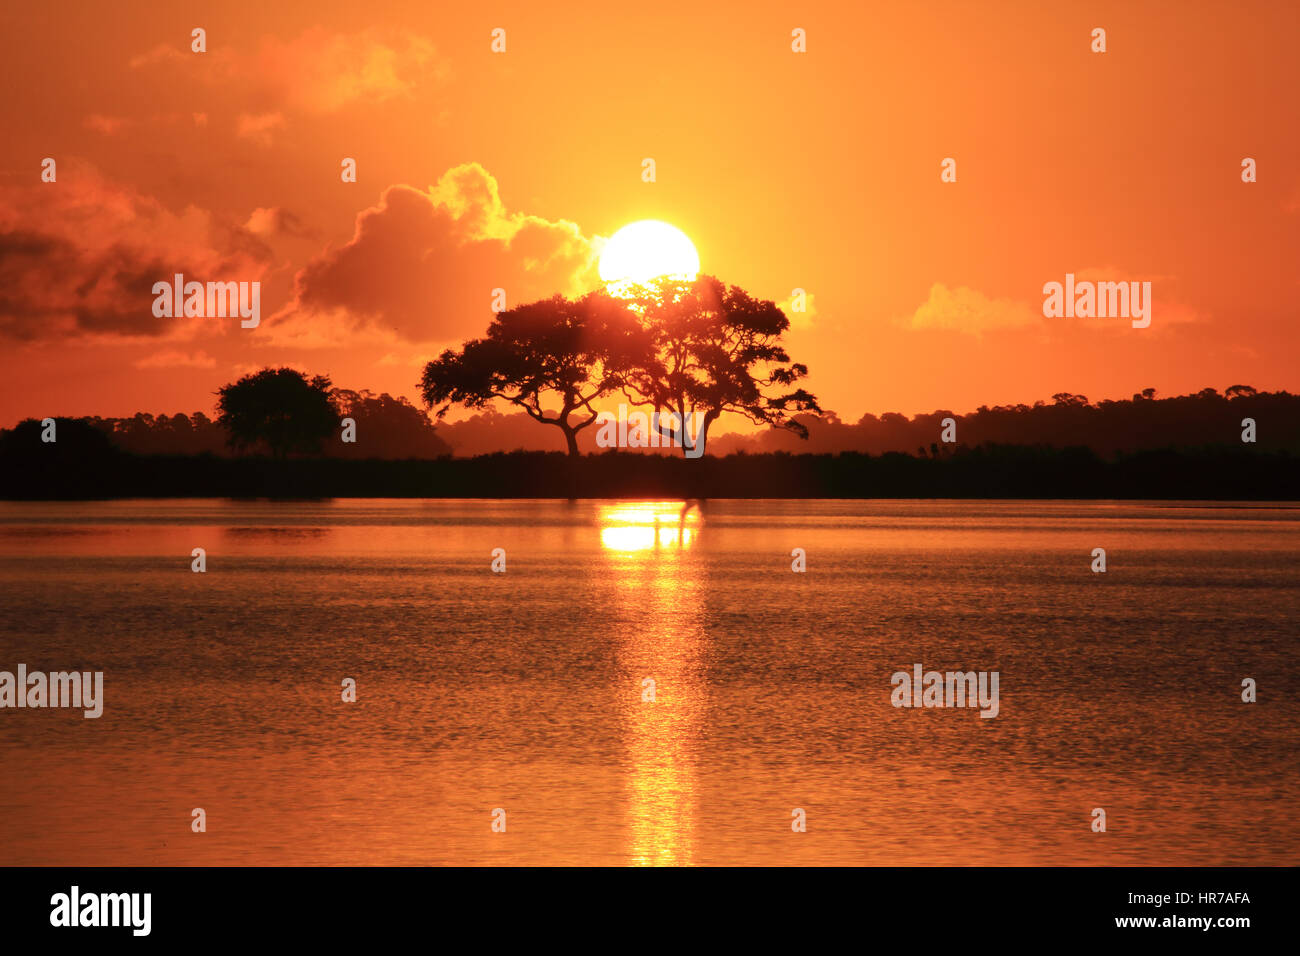 Two Live Oak trees are silhouetted against a glowing orange sky at Bass Pond on Kiawah Island, South Carolina. Stock Photo